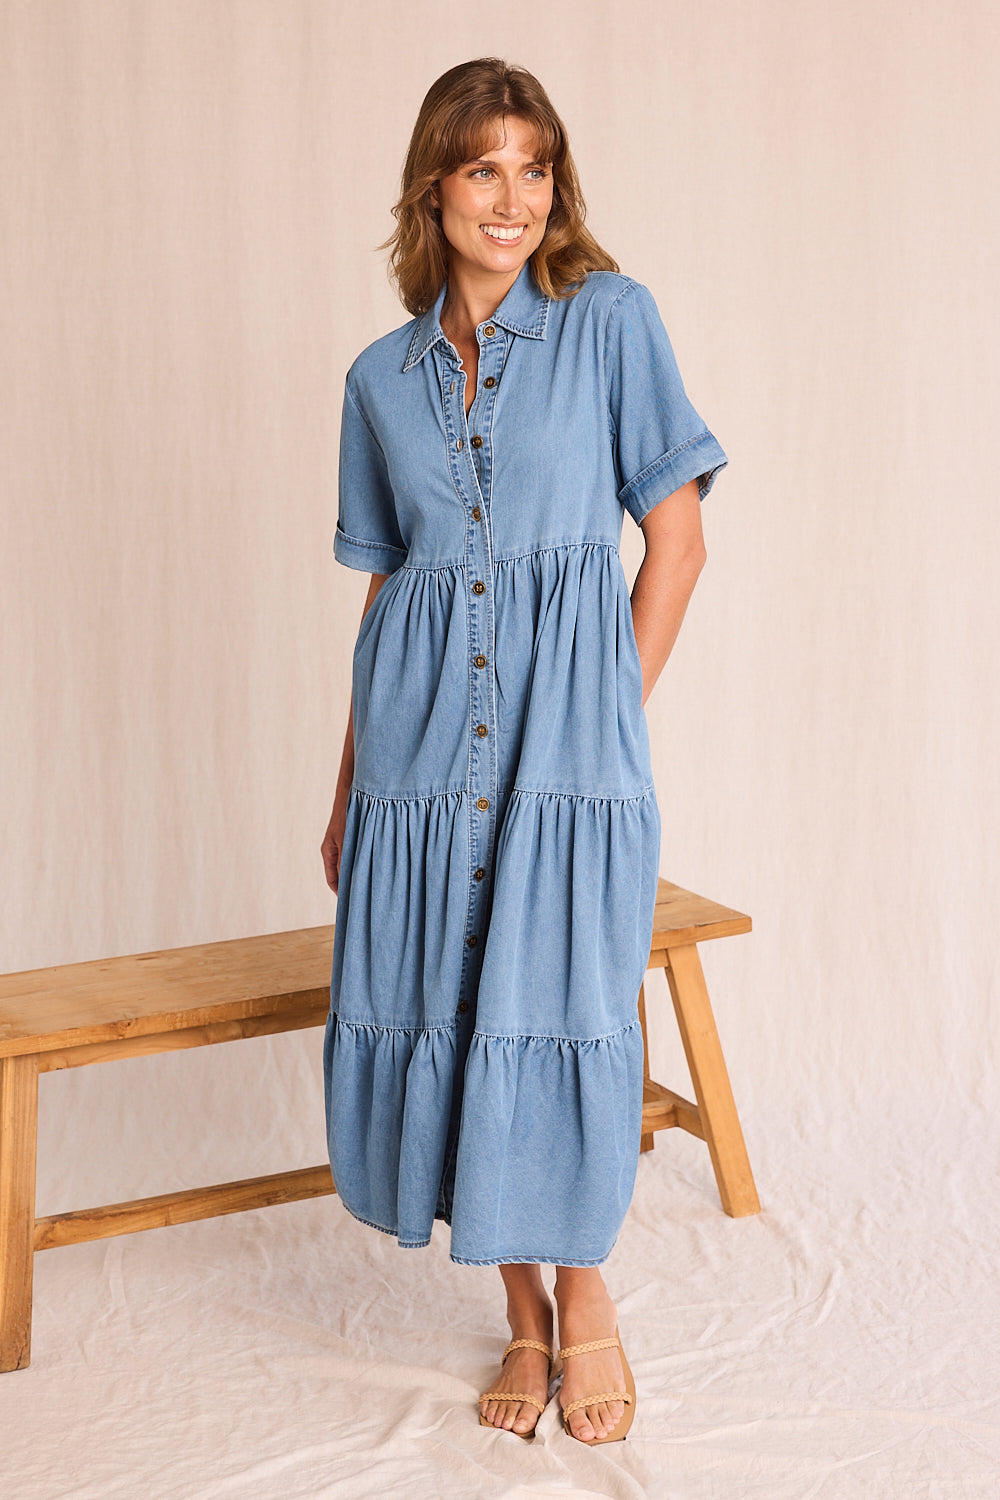 Sabre Chambray Button Through Dress in Light Wash